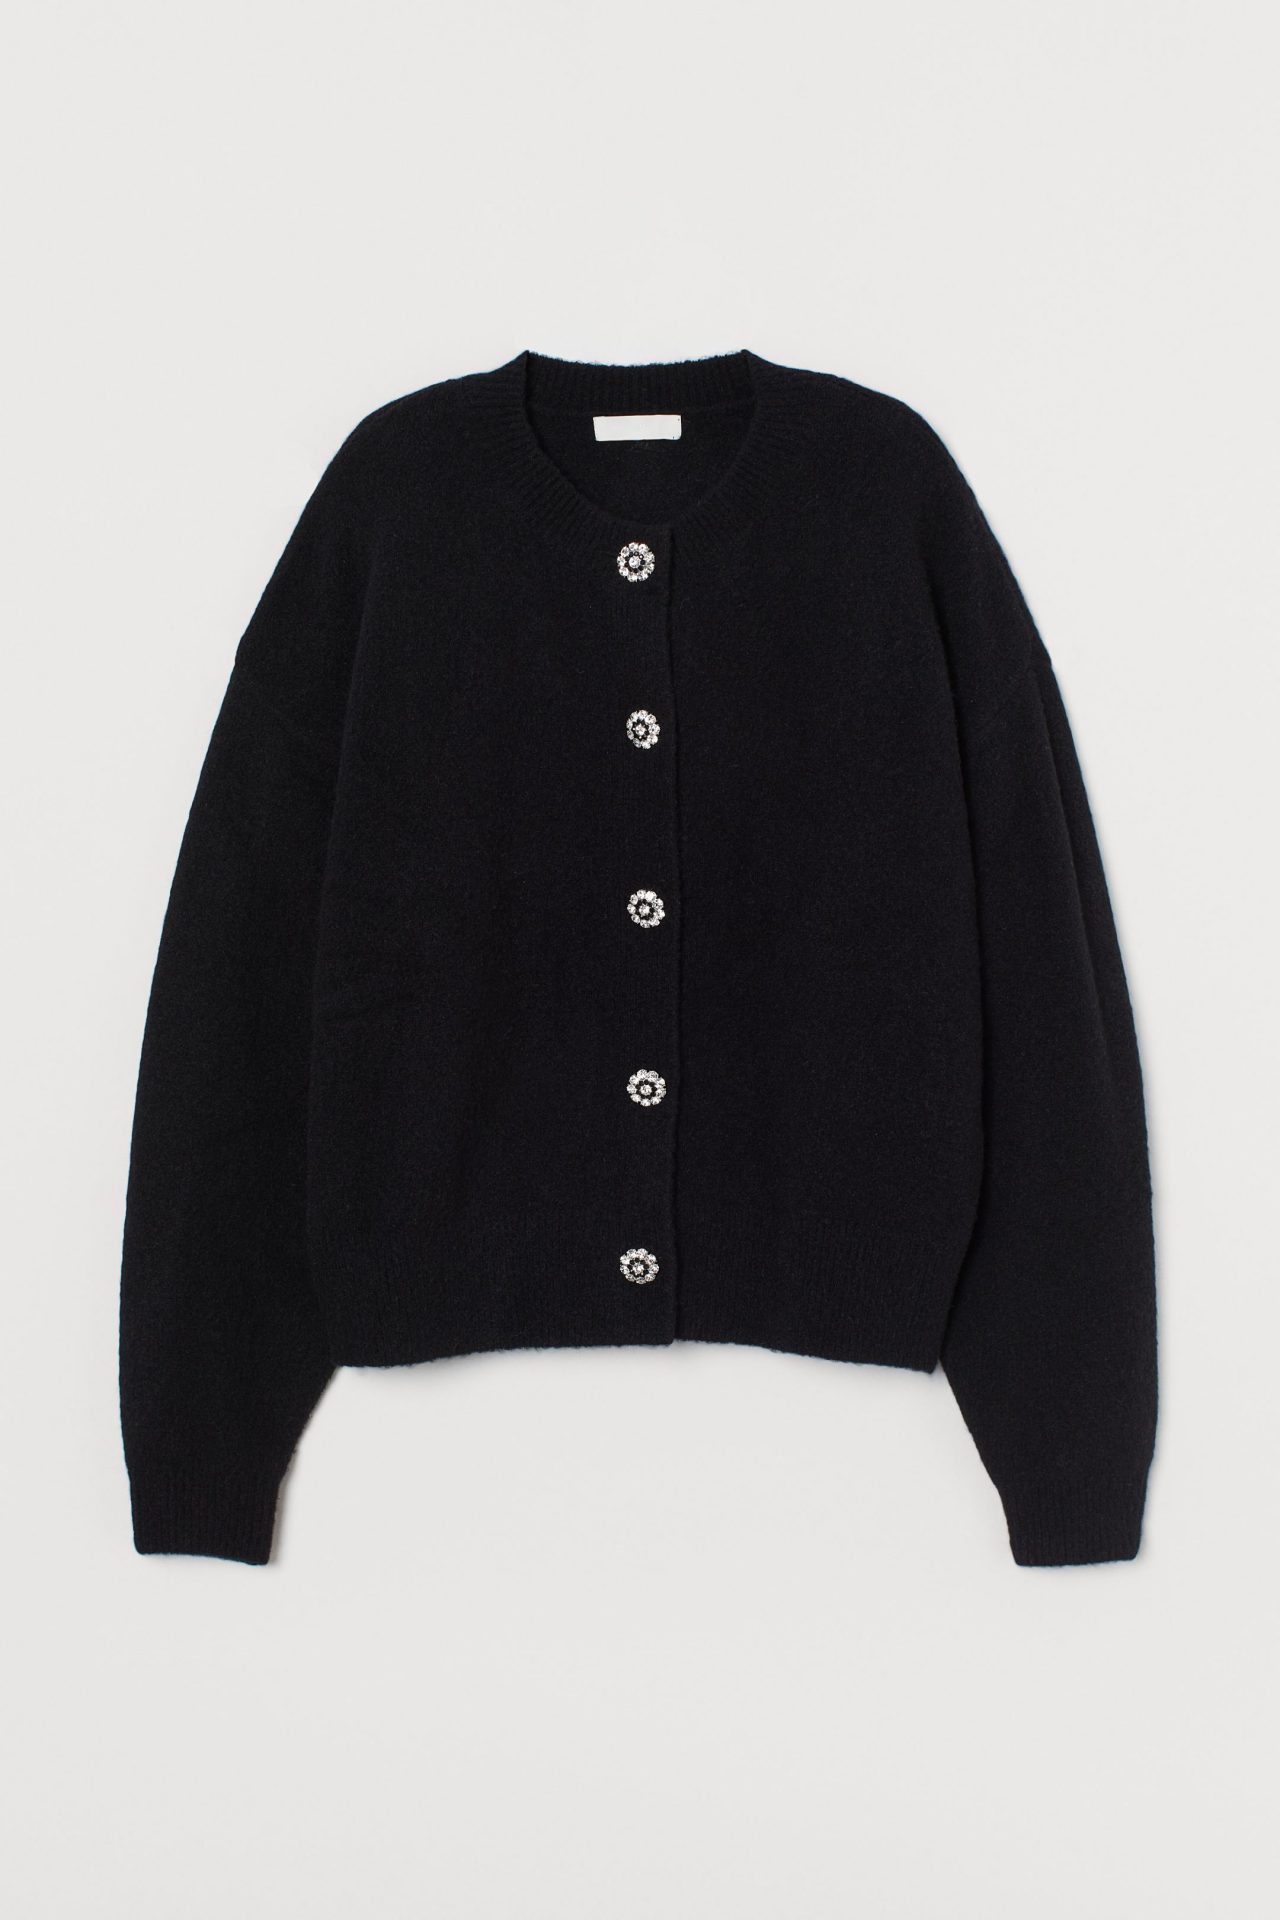 zara black jumper with buttons